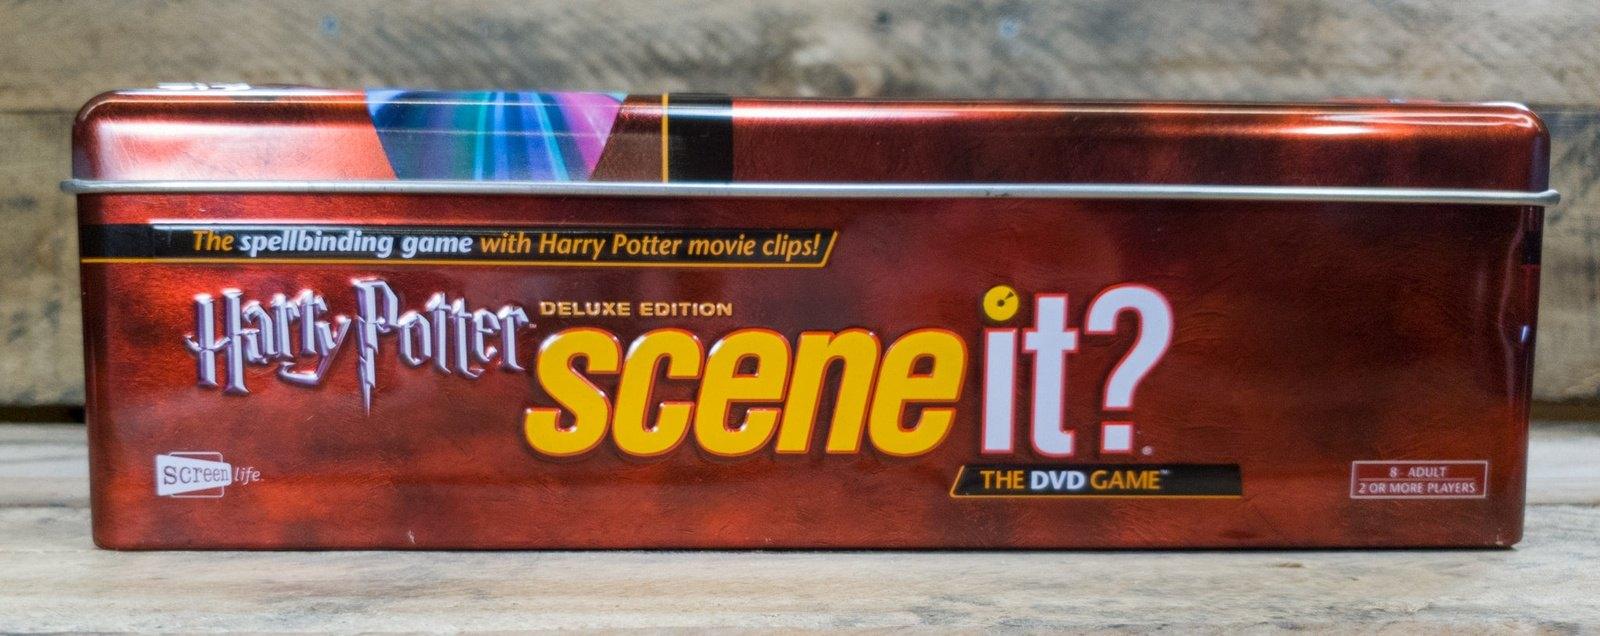 Harry Potter Scene It Interactive DVD Game Deluxe Edition 5